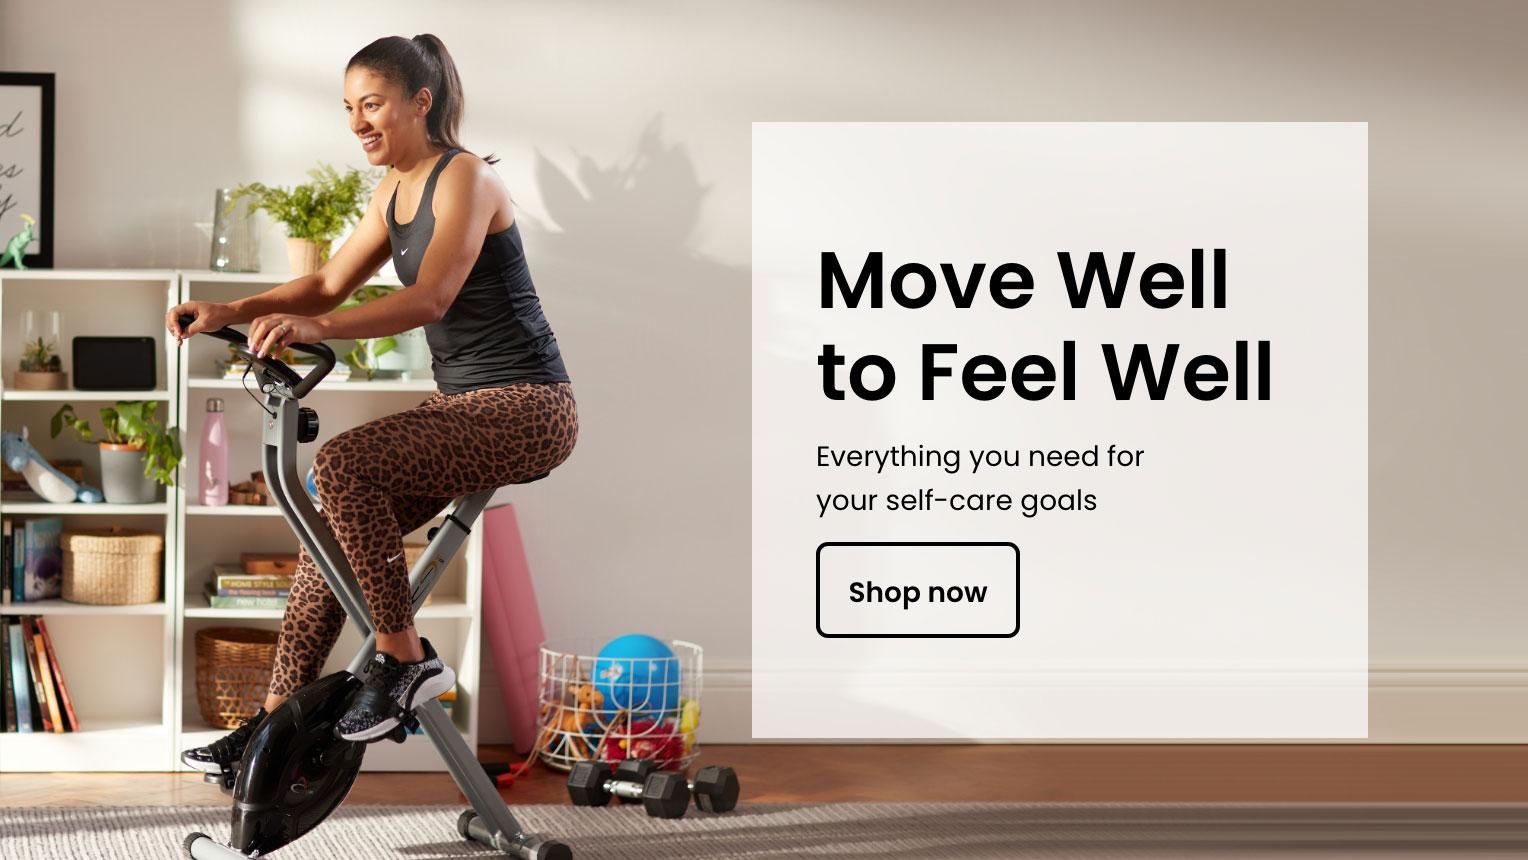 Move Well to Feel Well. Everything you need for
your self-care goals
Shop now